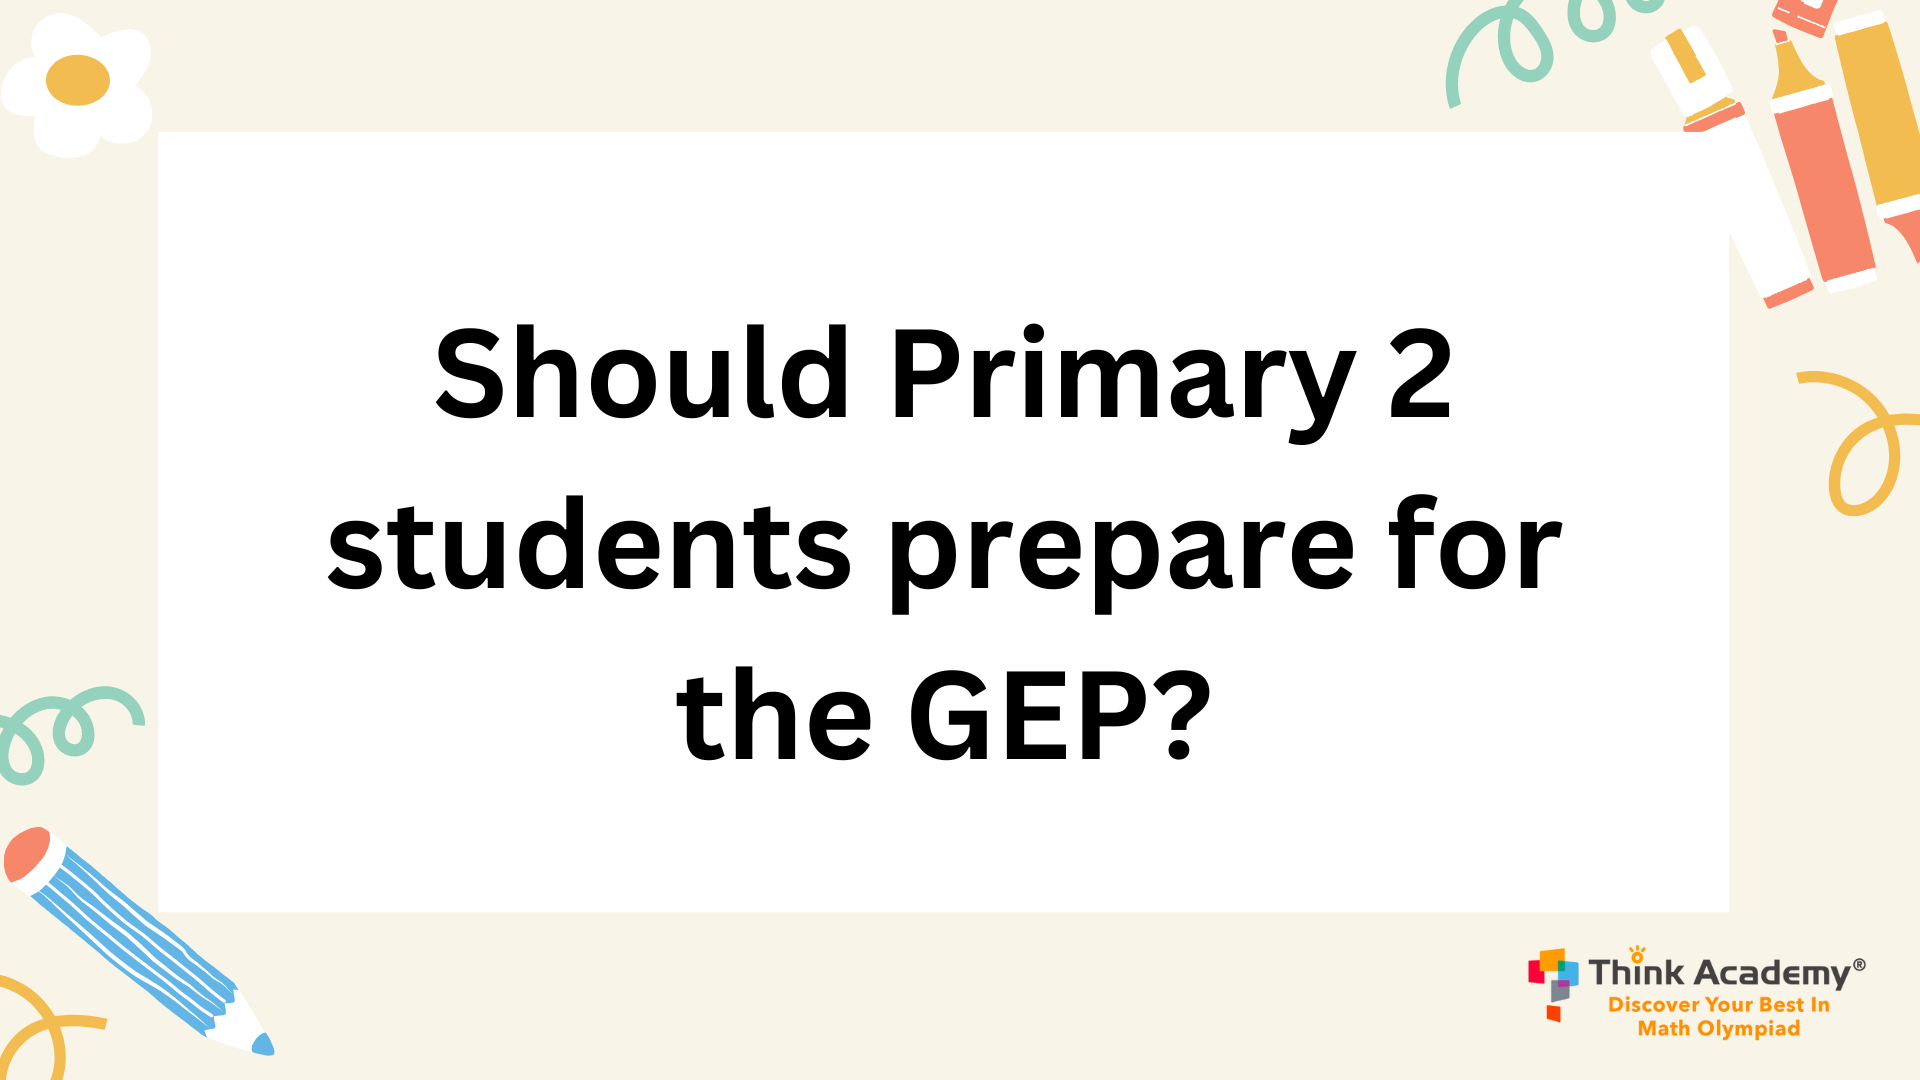 Should Primary 2 students prepare for the GEP?